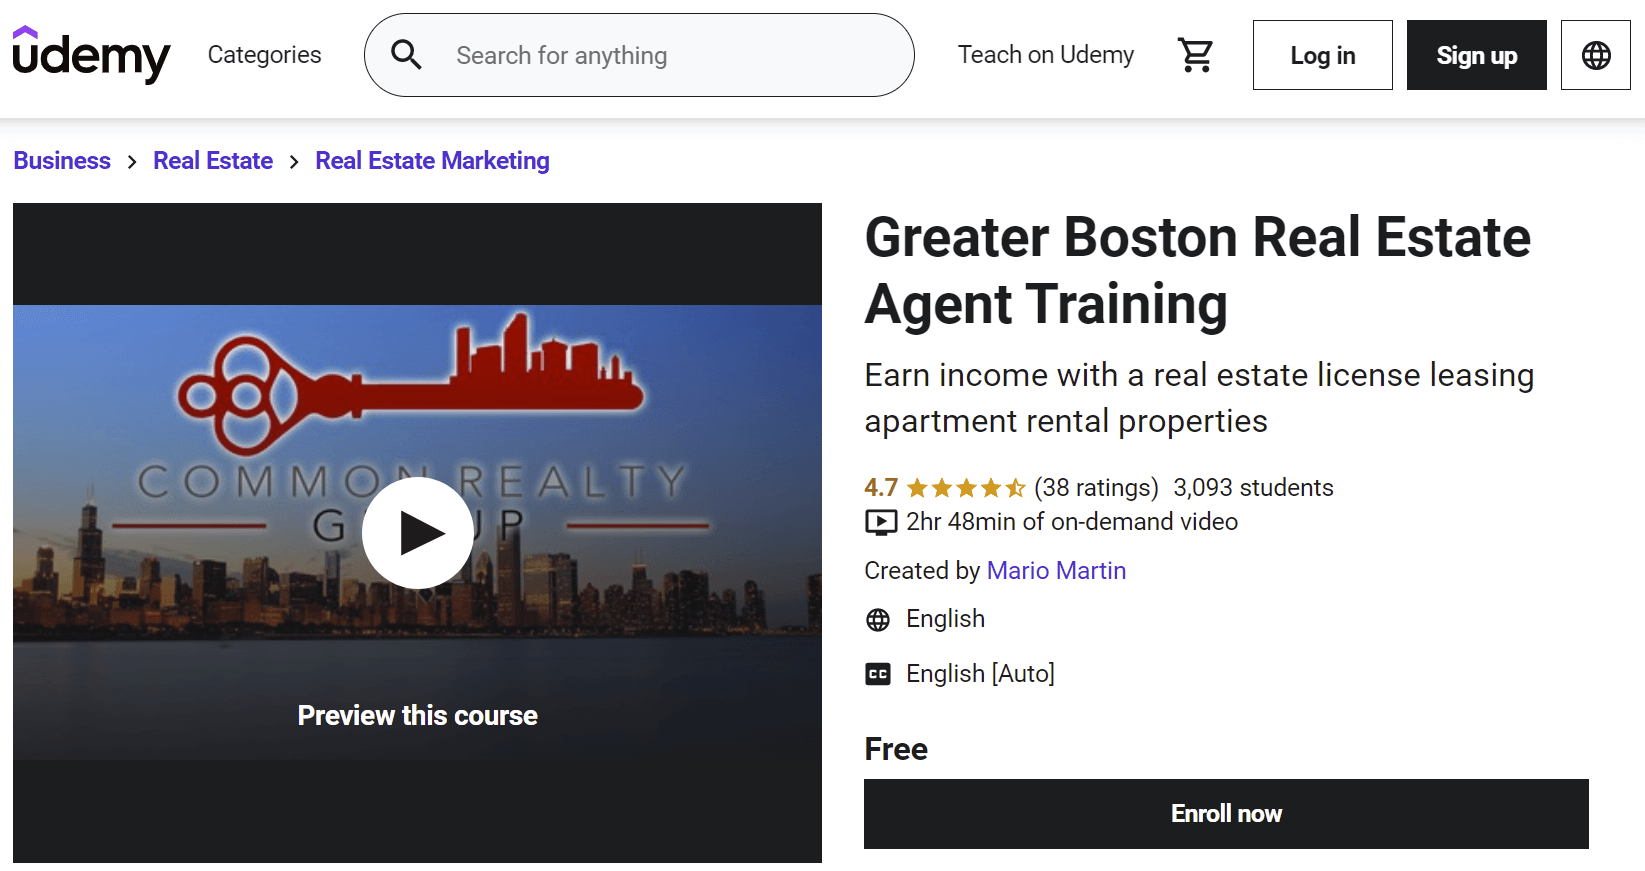 Udemy: Real Estate Marketing Tutorial: Greater Boston Real Estate Agent Training Overview